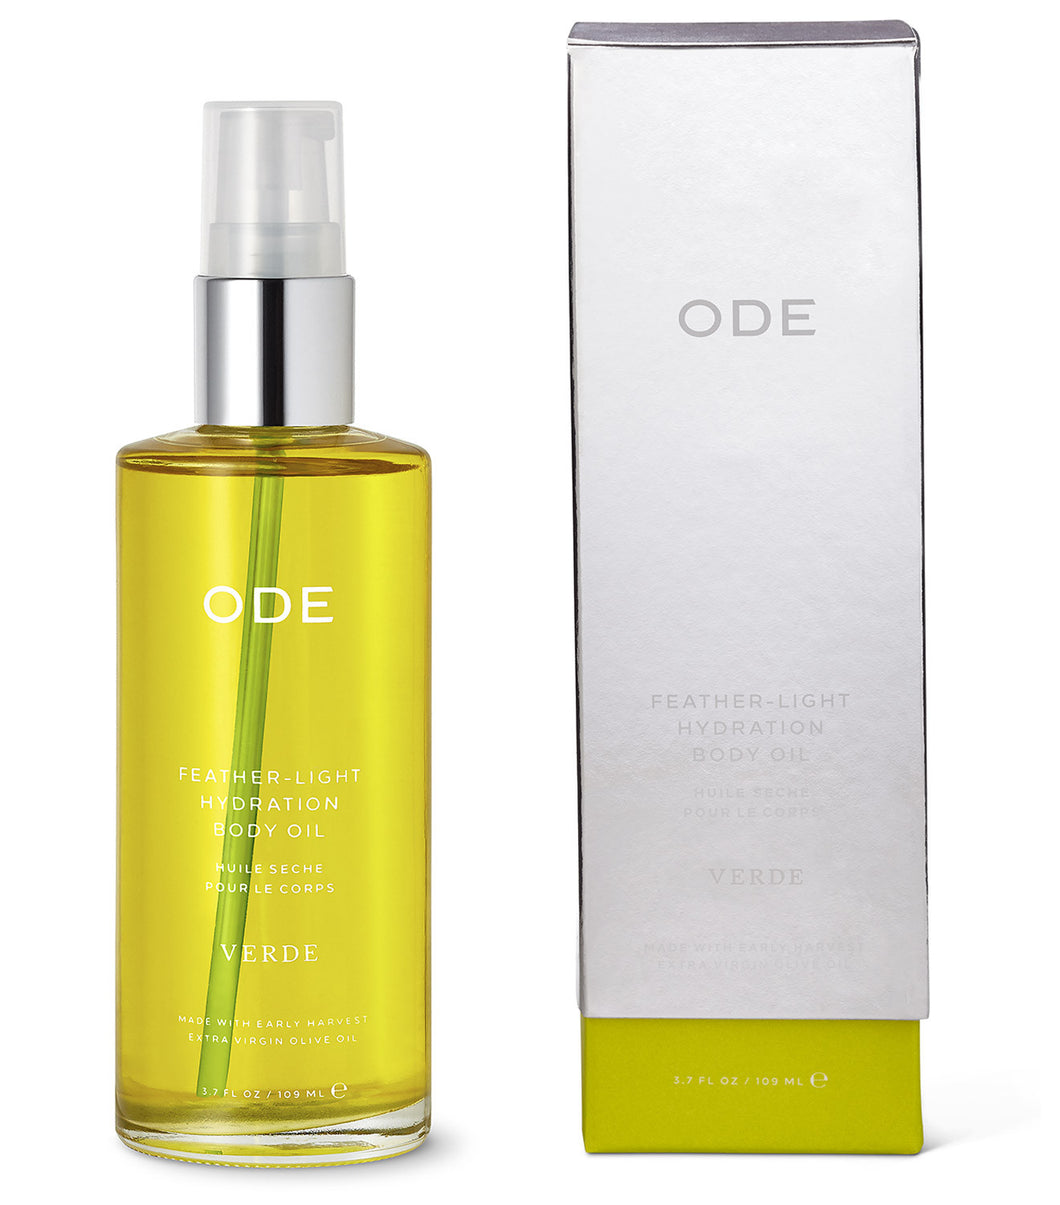 Ode Verde Feather-Light Hydration Body Oil 3.7 fl oz - Indie Indie Bang! Bang!